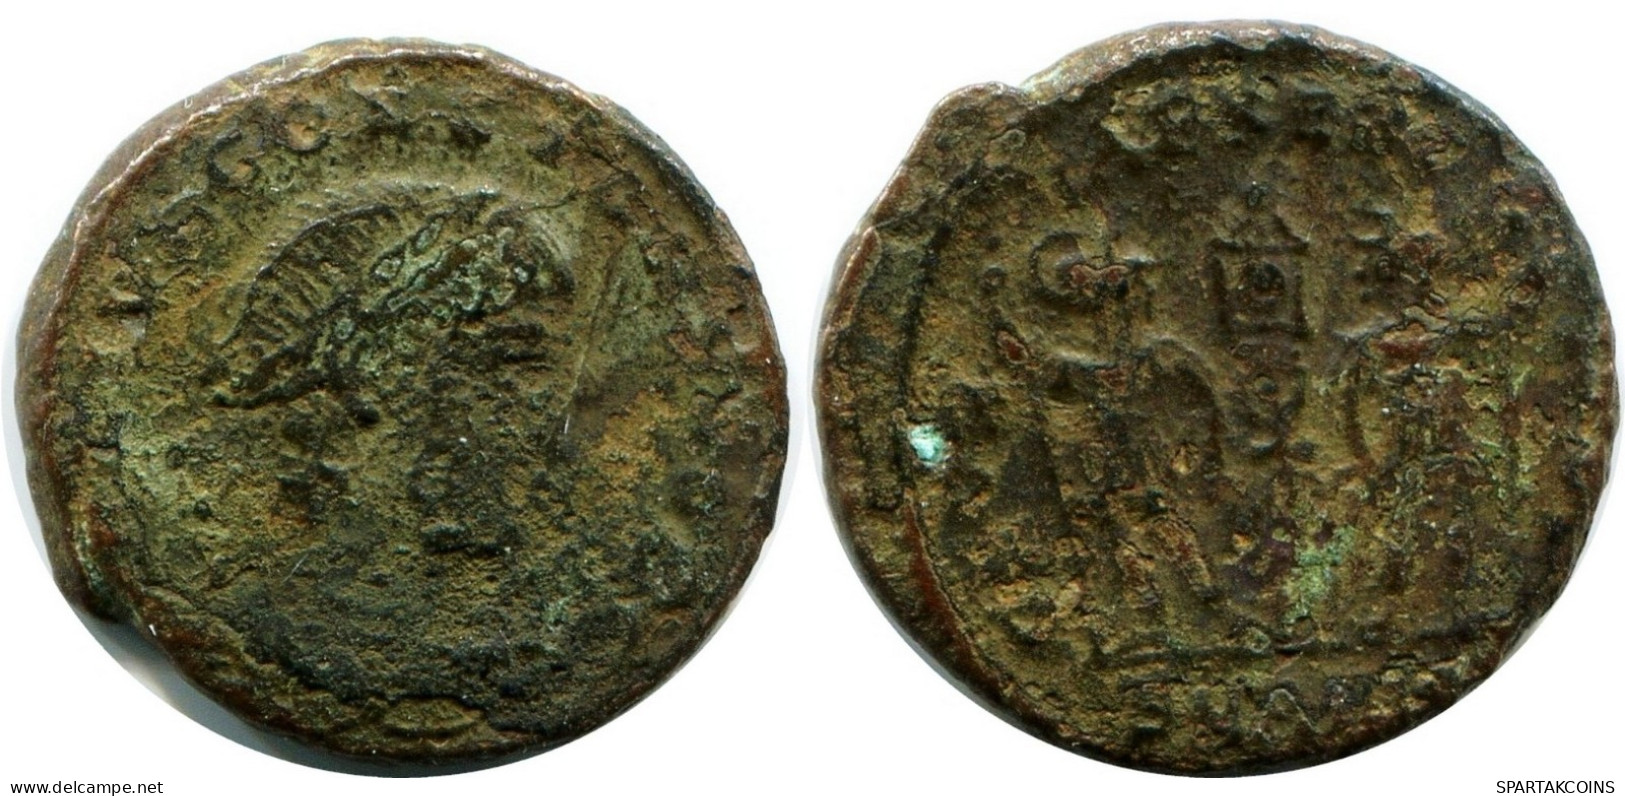 CONSTANS MINTED IN ANTIOCH FOUND IN IHNASYAH HOARD EGYPT #ANC11833.14.U.A - El Imperio Christiano (307 / 363)